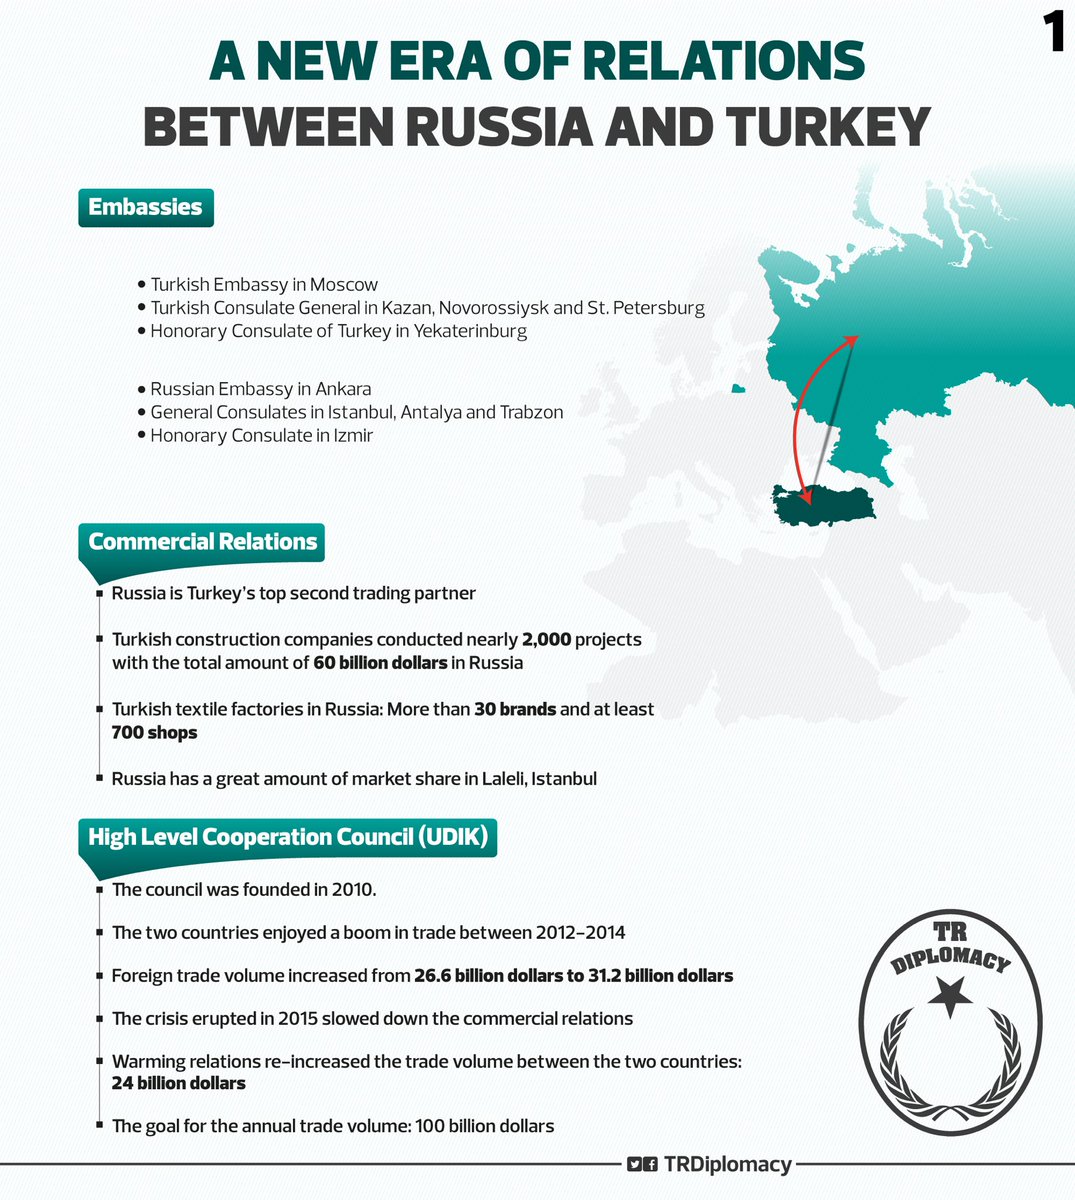 A new era of relations between Turkey and Russia